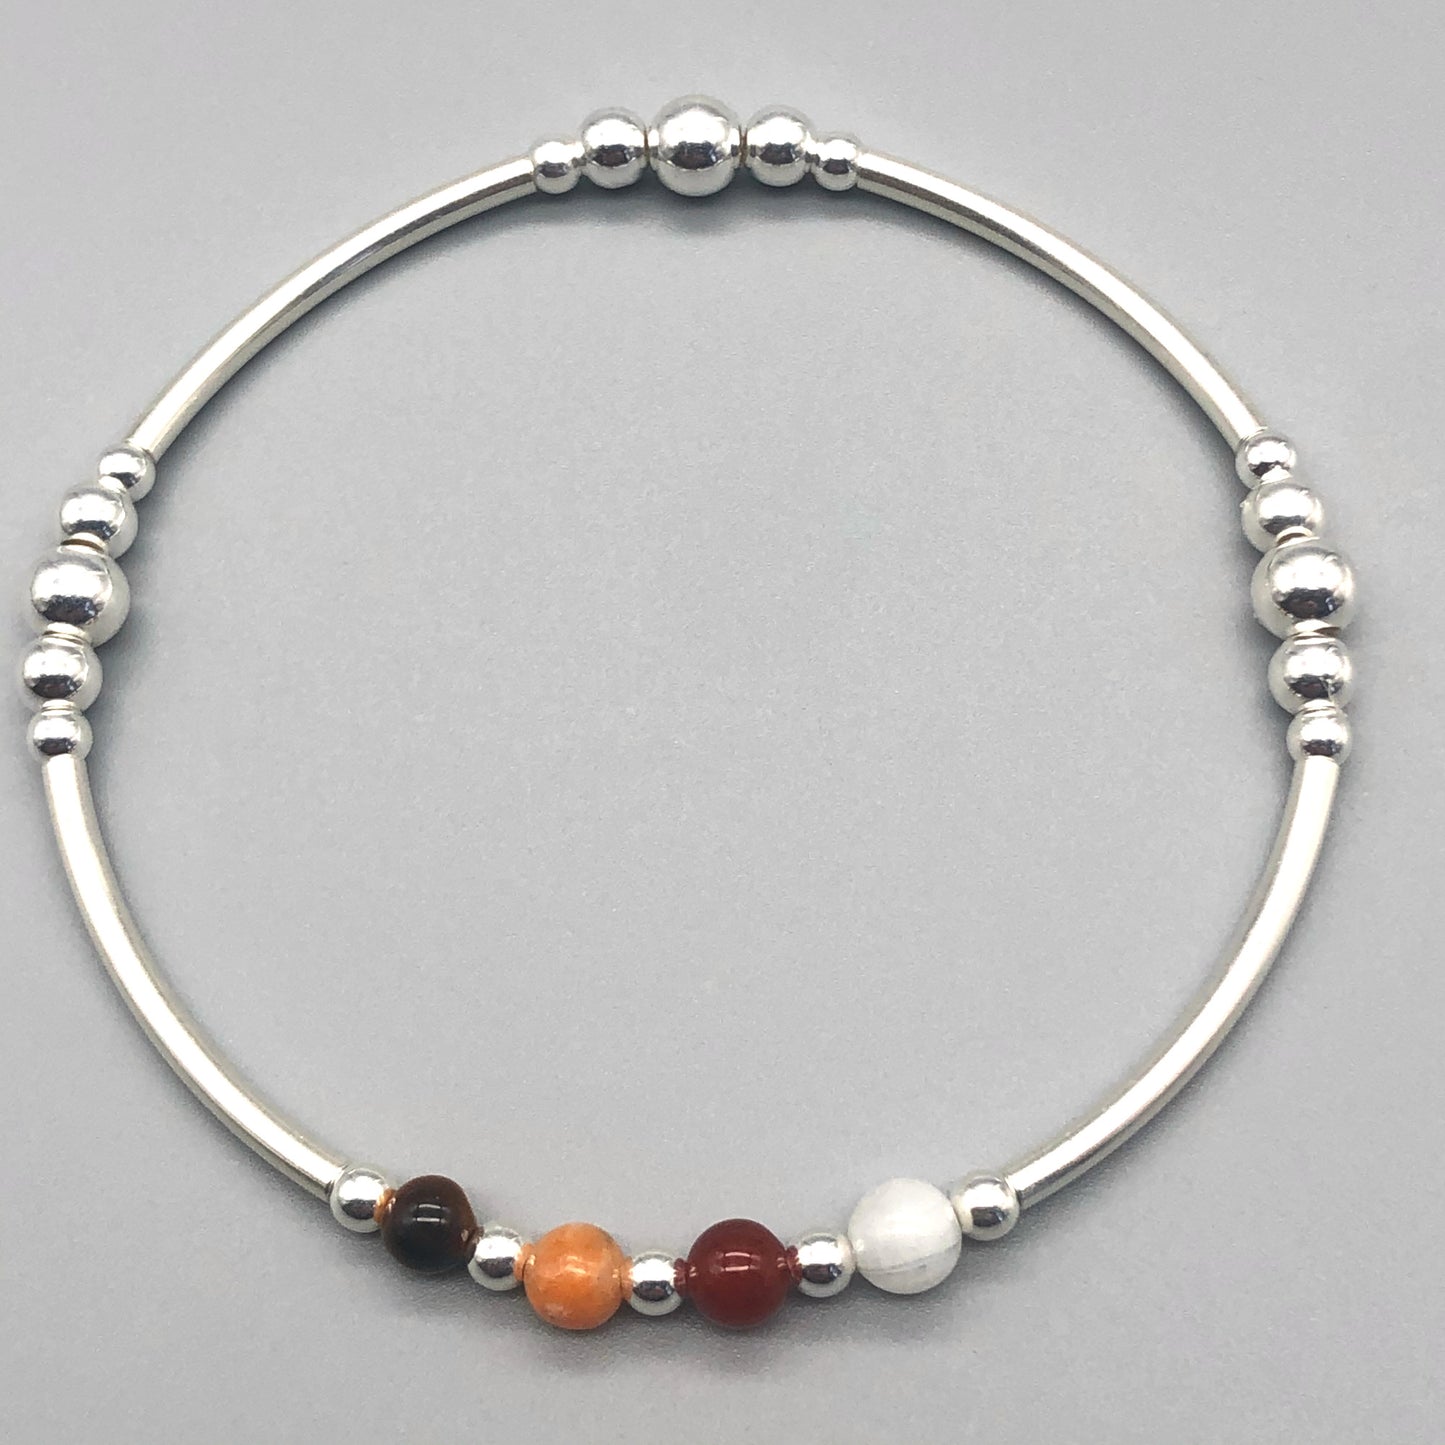 Confidence healing crystal beaded sterling silver women's stacking bracelet by My Silver Wish